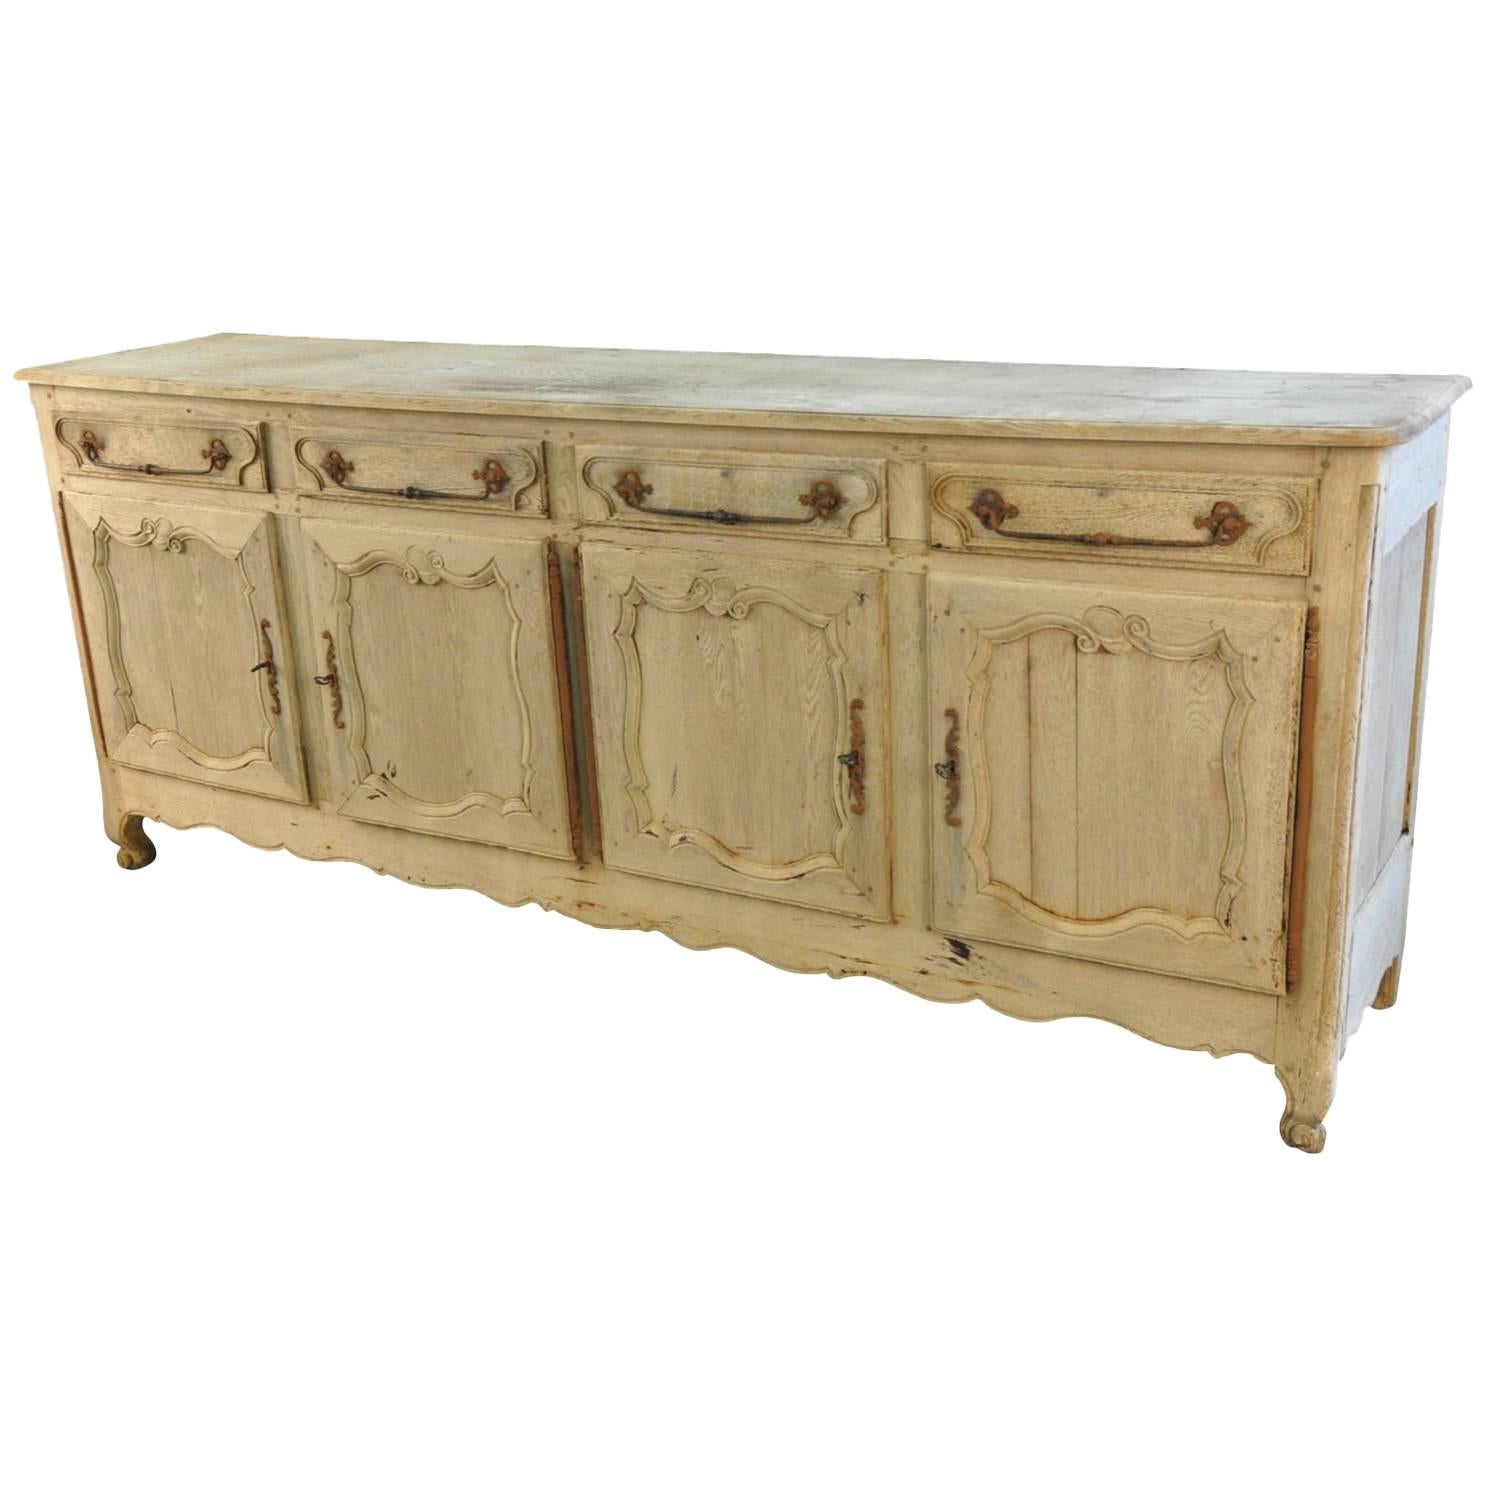 19th Century French Provencal Buffet or Enfilade